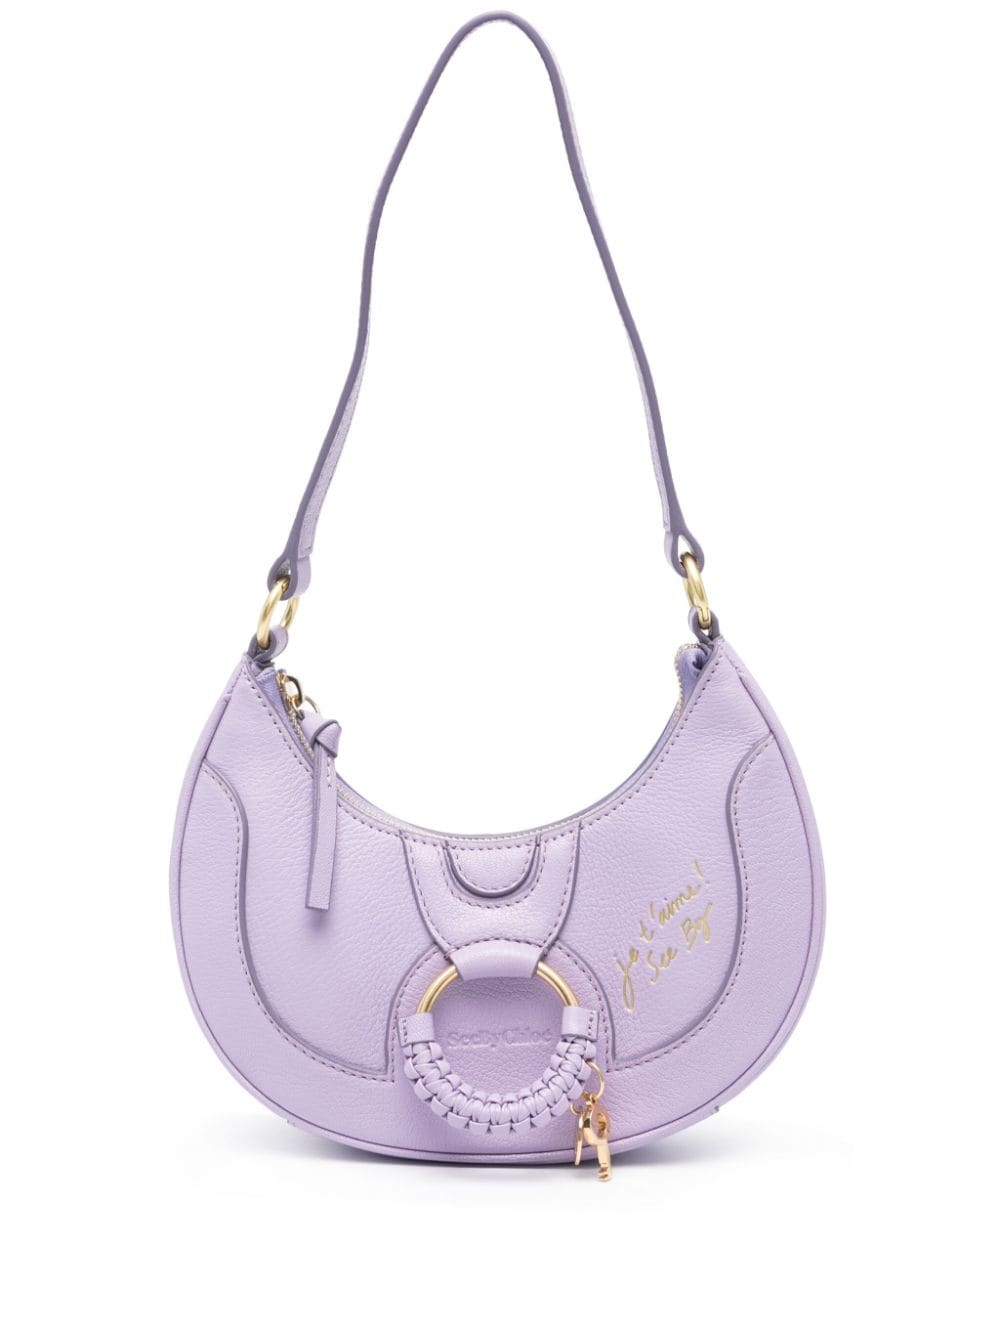 See by Chloé Hana leather shoulder bag - Purple von See by Chloé